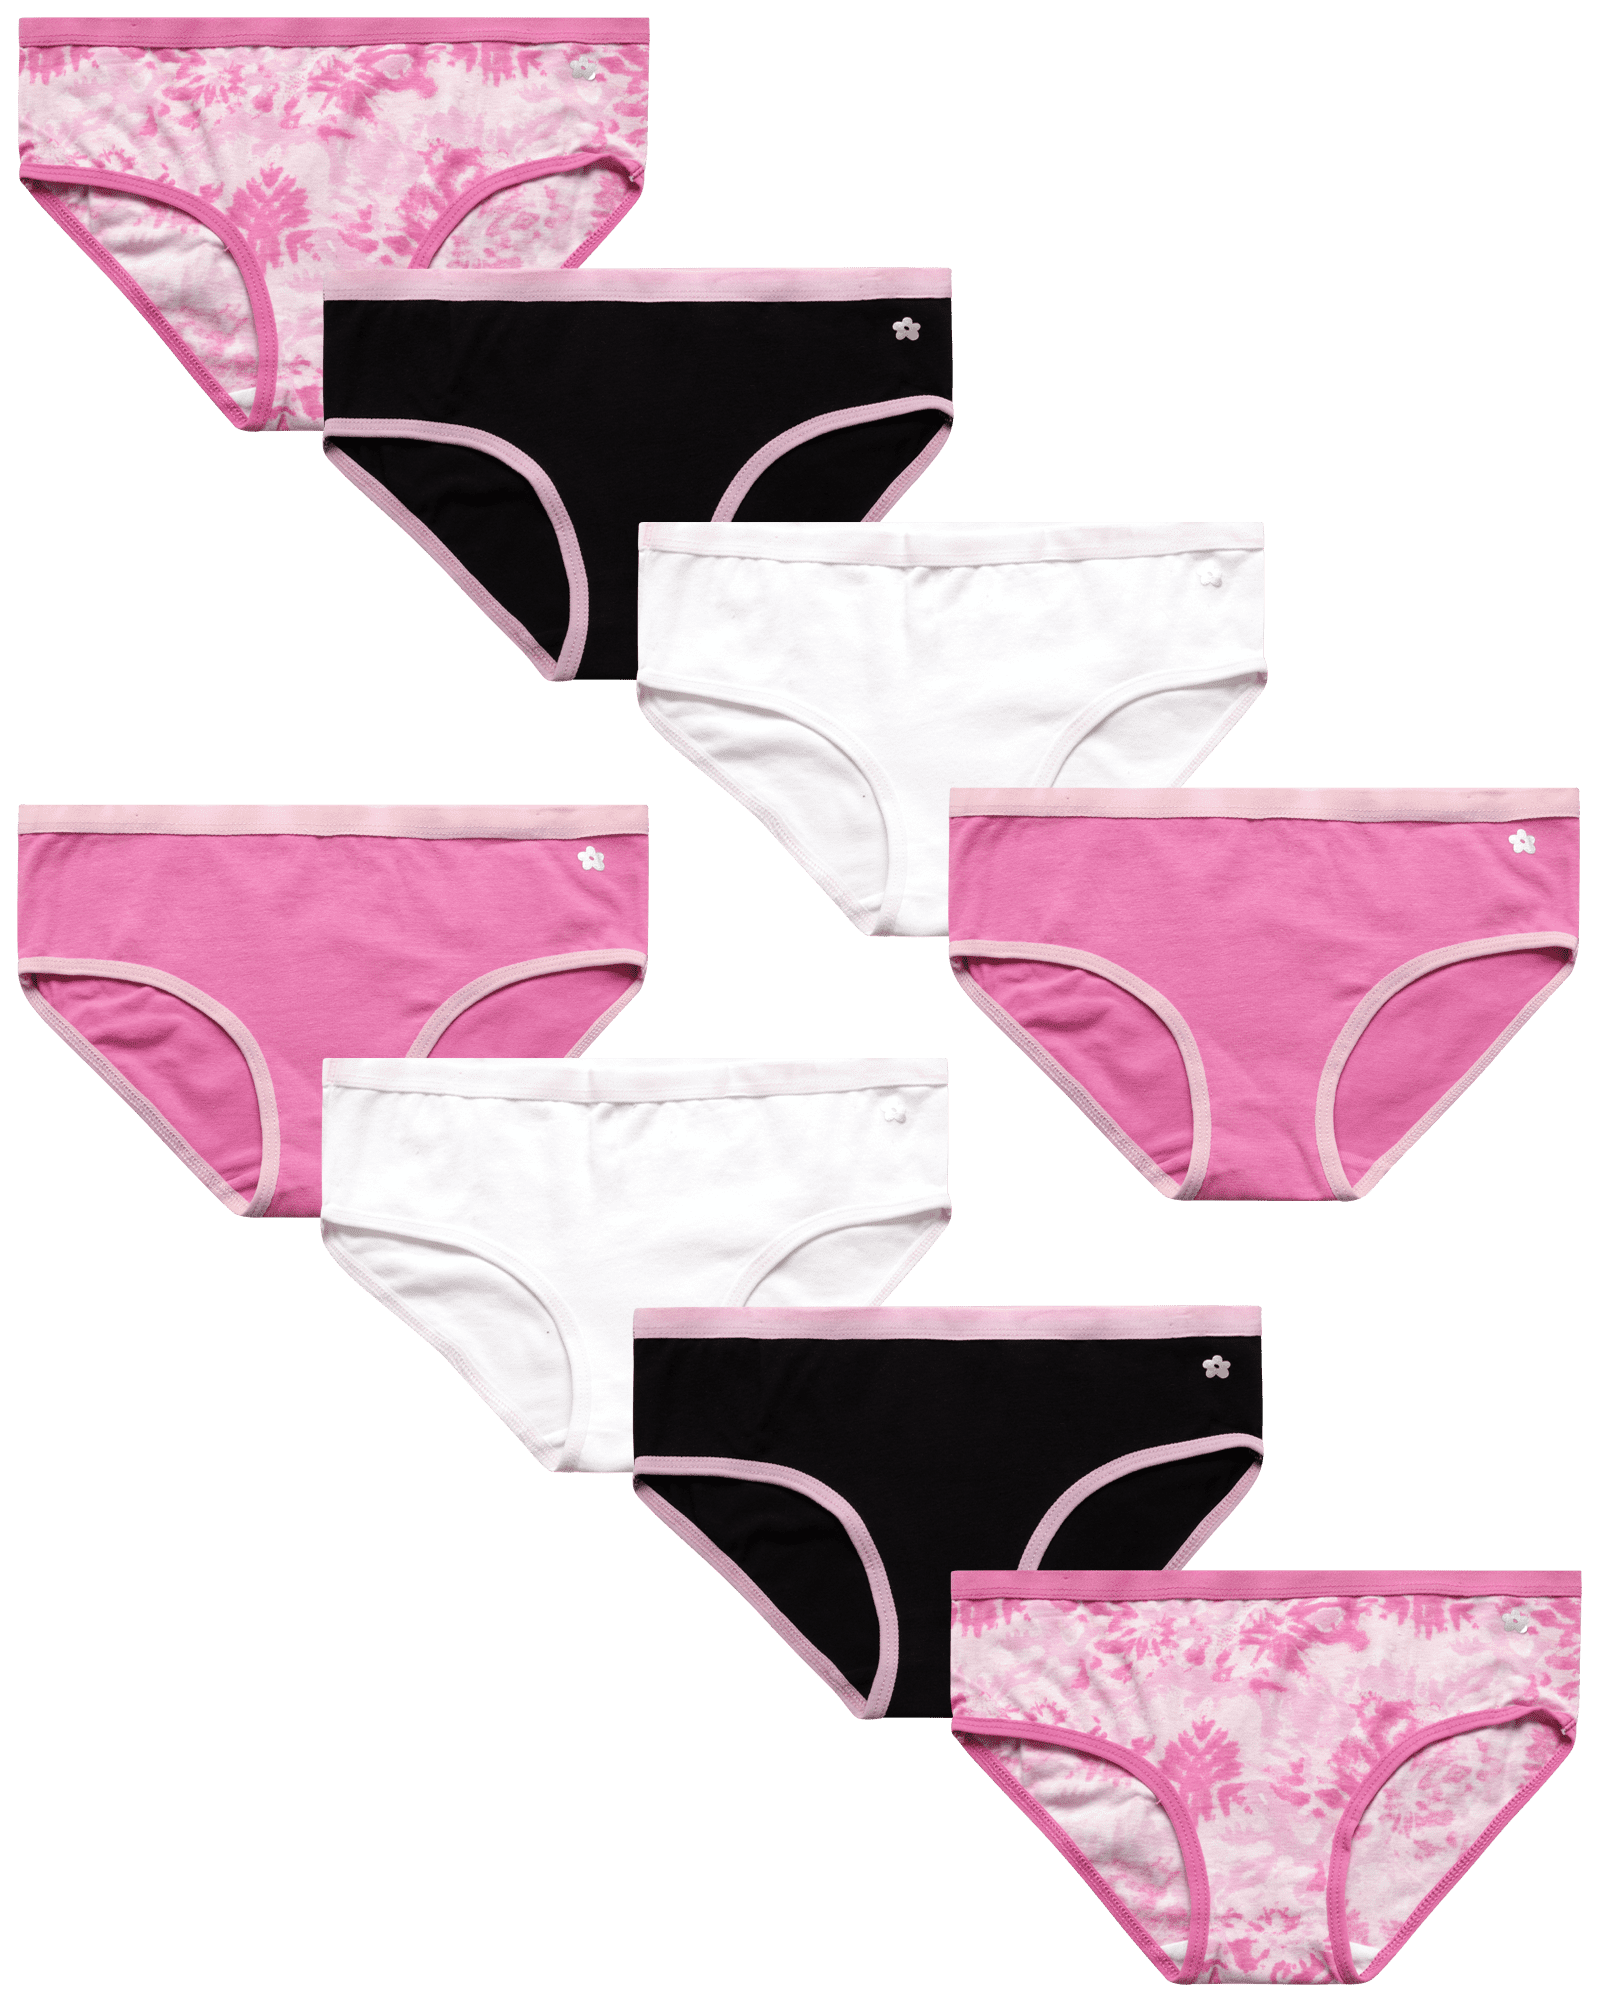 Limited Too Girls' Underwear - 100% Cotton Hipster Briefs for Girls - 8  Pack Panties (6-14) 